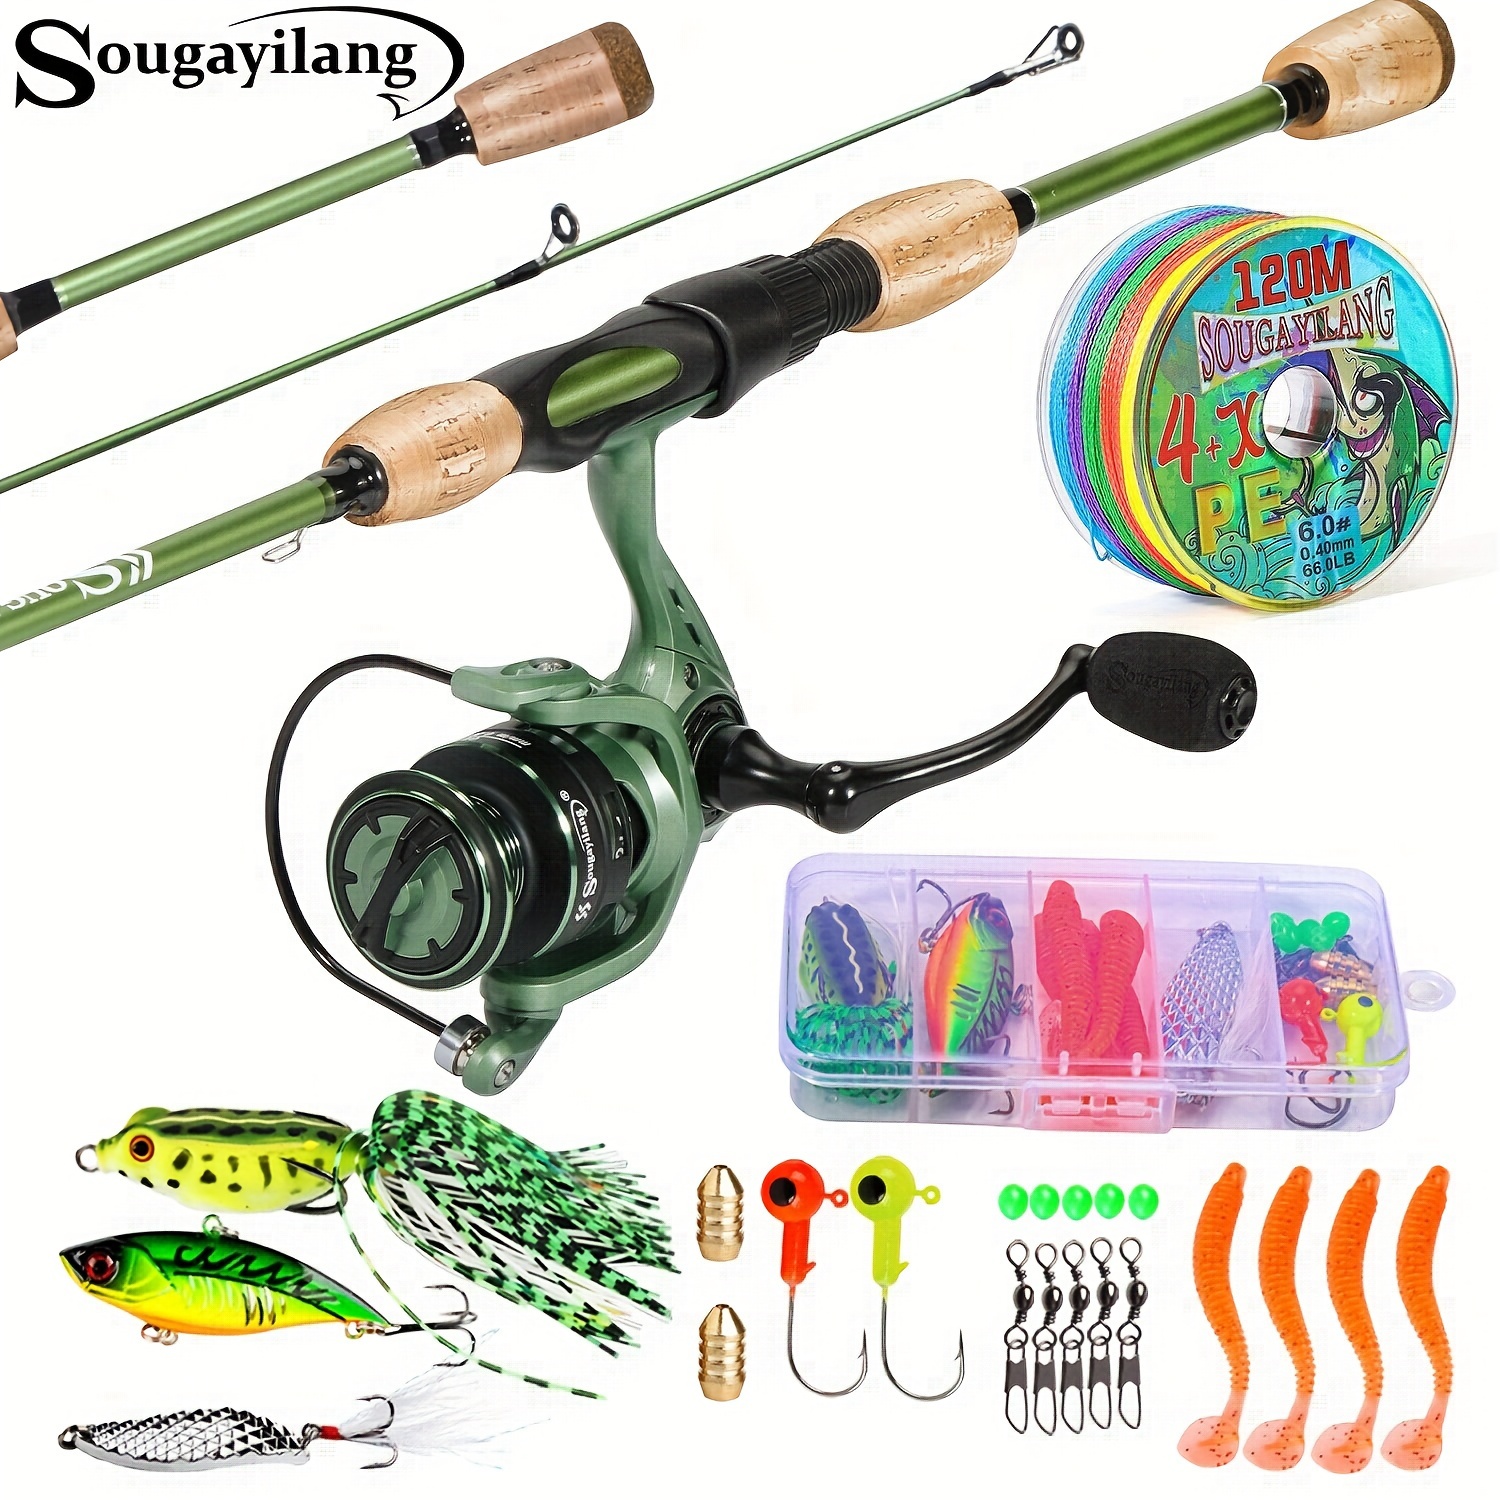 Sougayilang Spinning Reel And Fishing Rod Combination Set, Including  2-section Durable Carbon Fishing Rod, 5.2:1 Gear Ratio Fishing Reel With  EVA